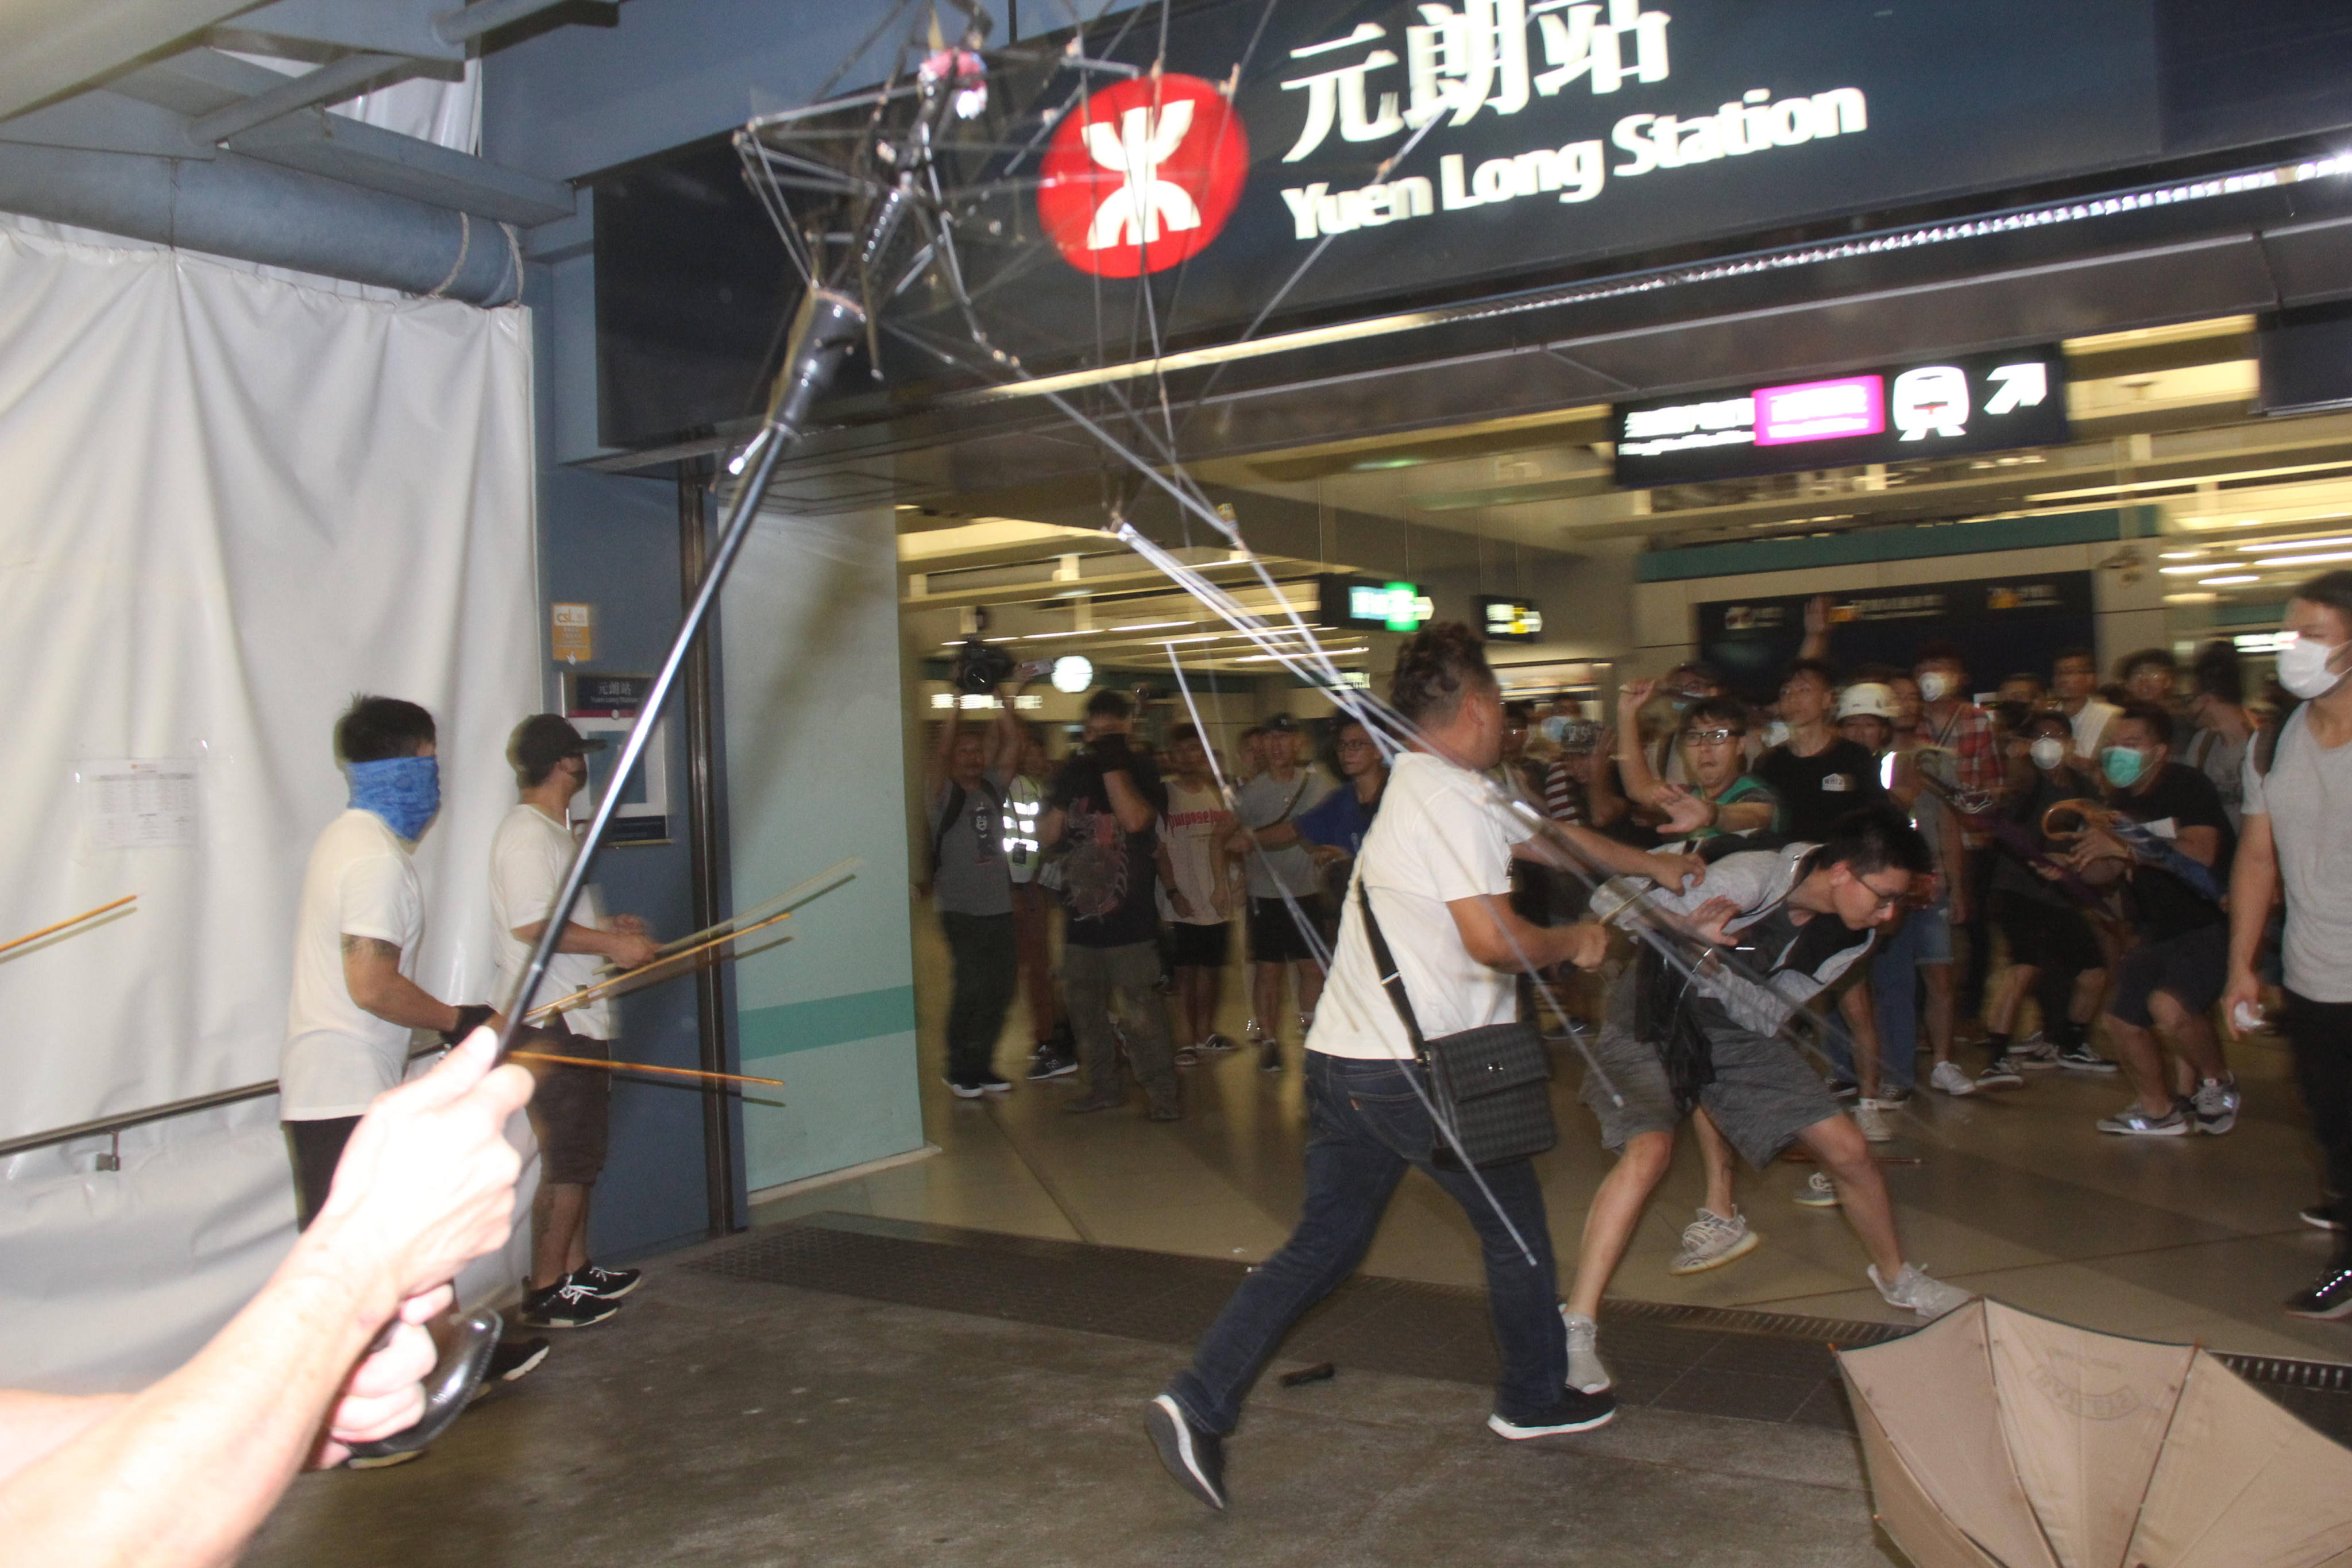 Men in white T-shirts launch an attack at the Yuen Long MTR station during the 2019 social unrest. Photo: Handout